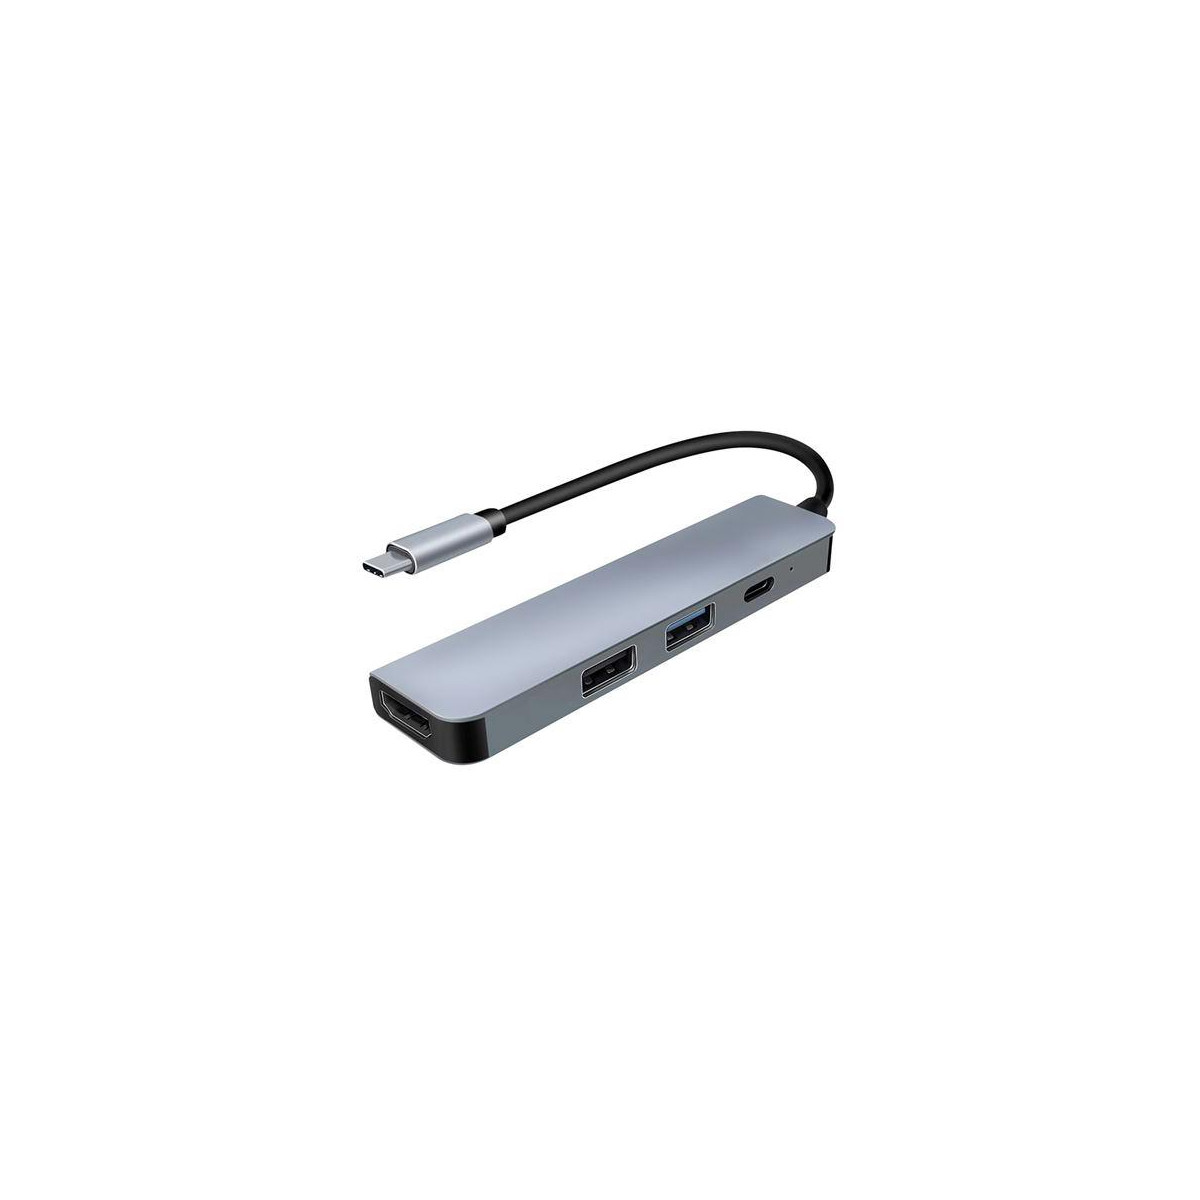 More about USB-C hub SOLIGHT SSH1201